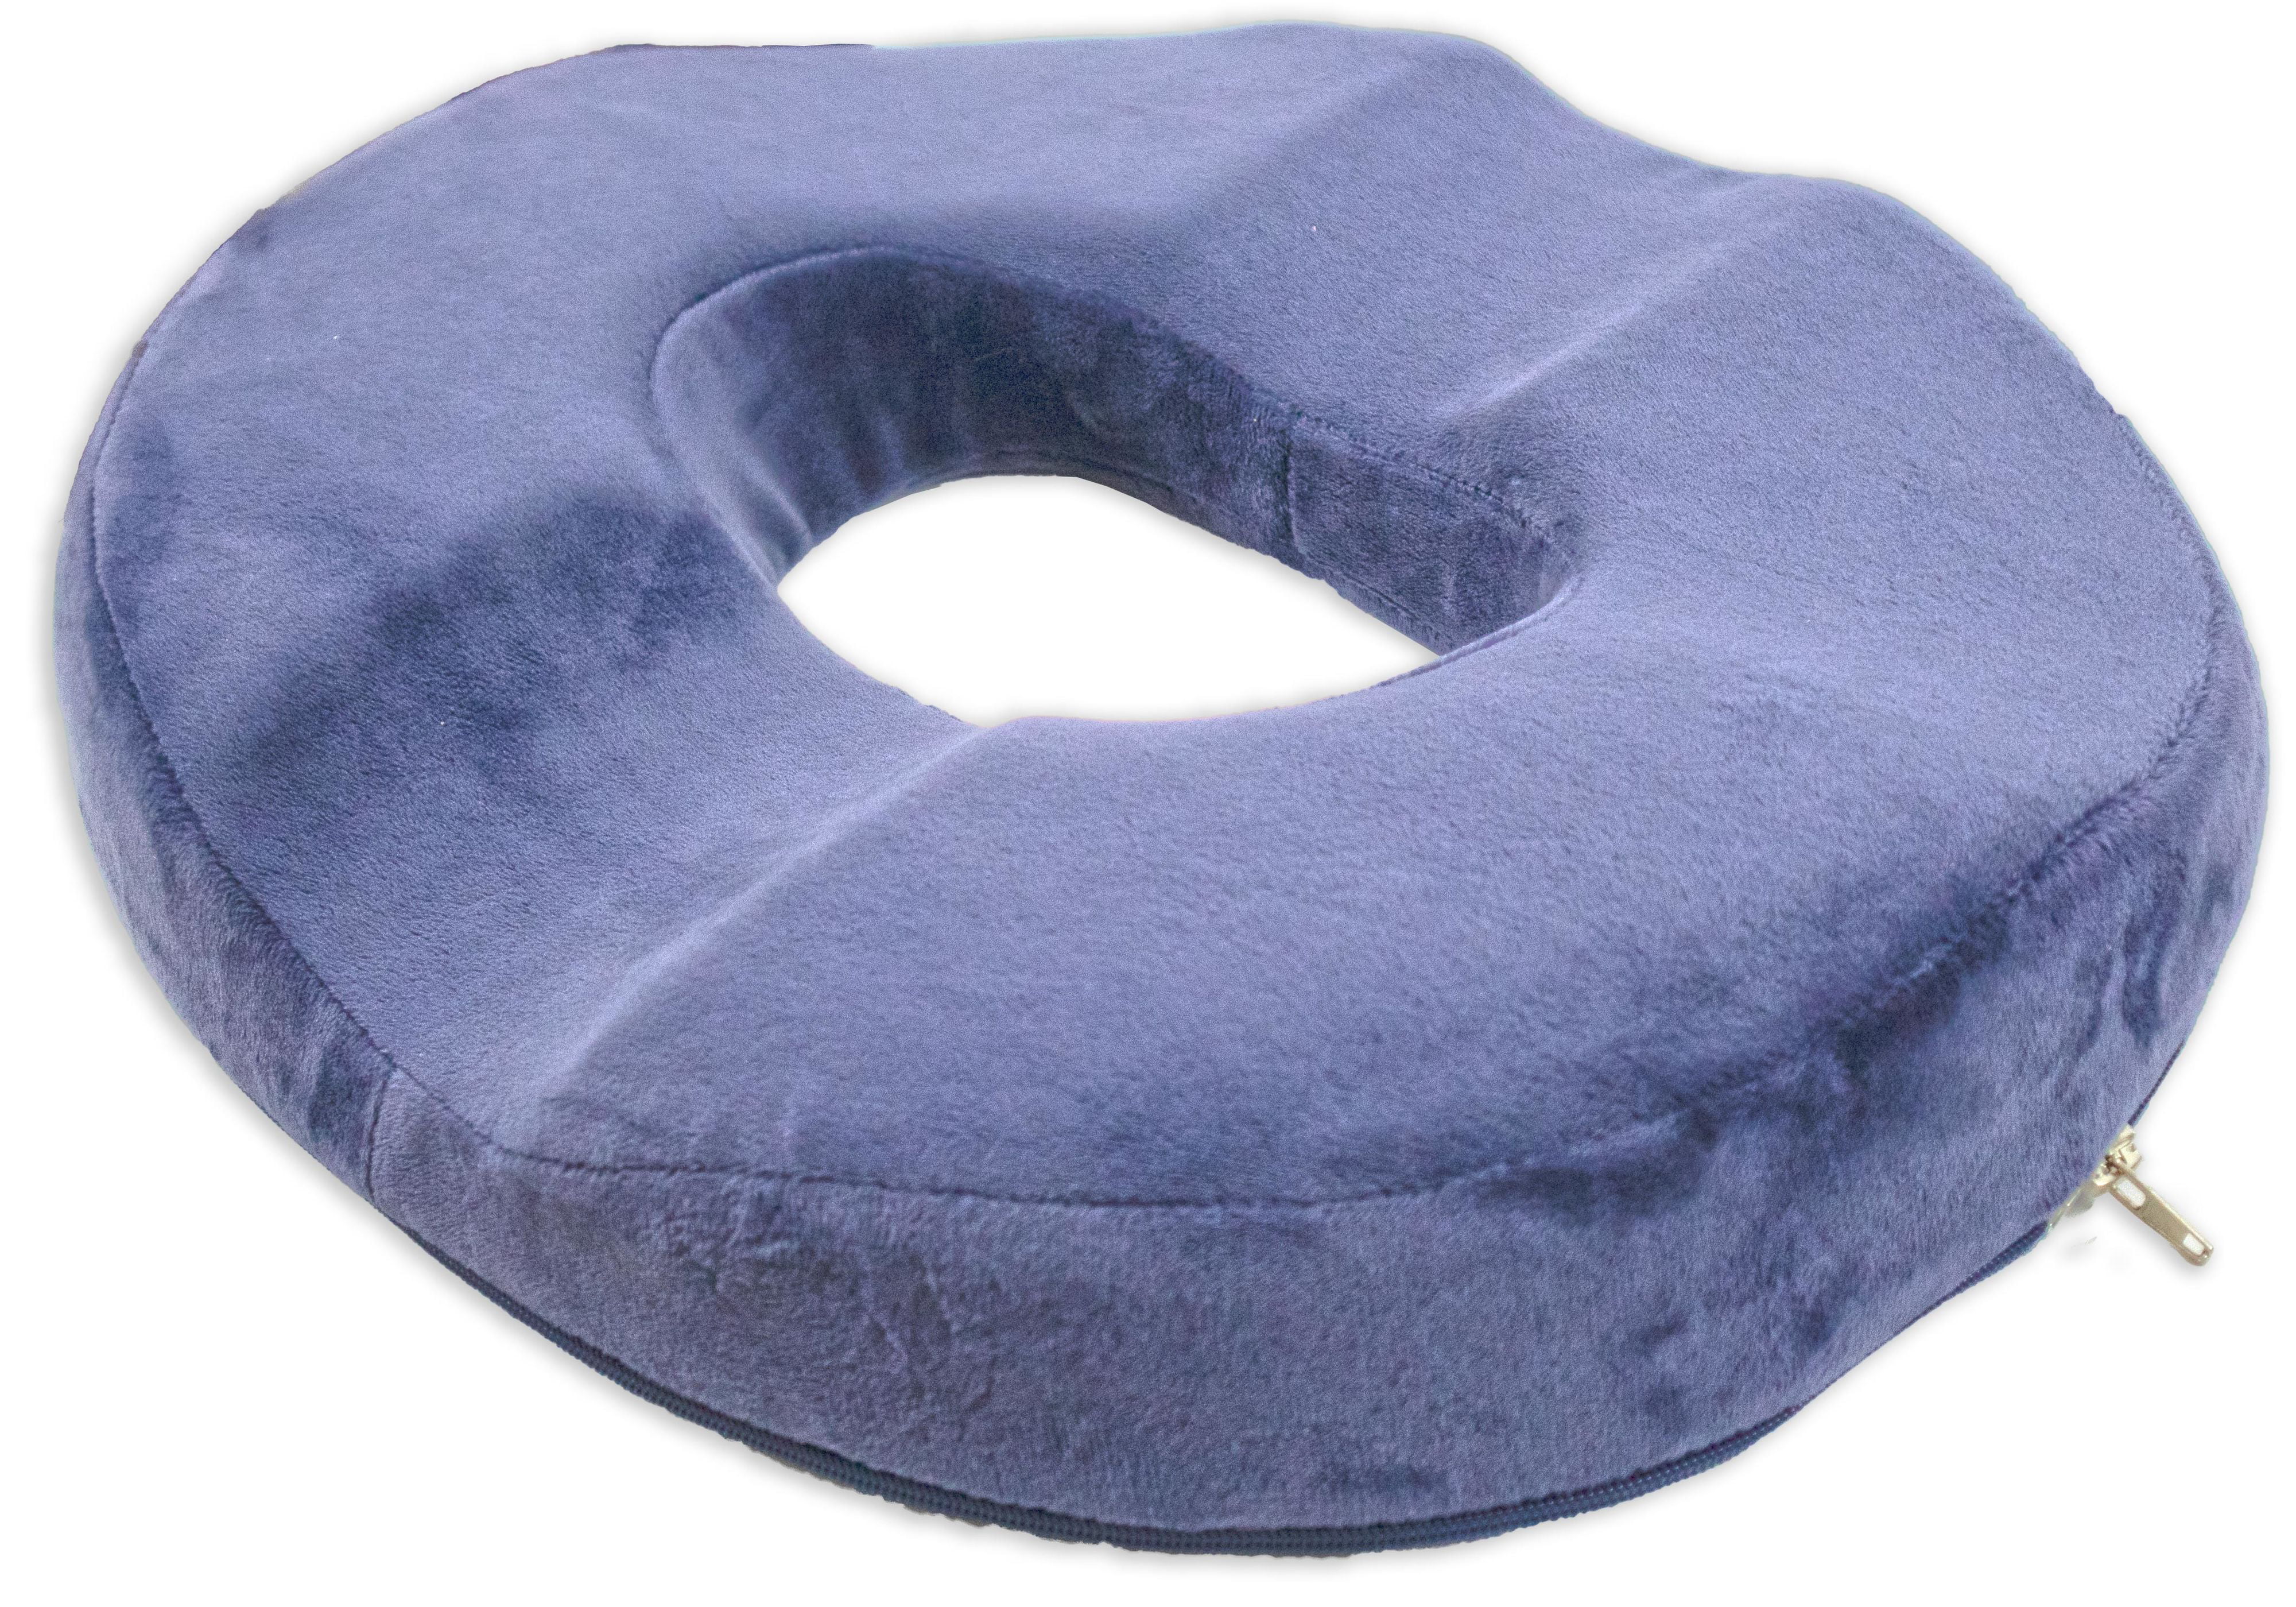 Coccyx Pain Relief Memory Foam Comfort Donut Ring Chair Seat Cushion Pillow Hot 